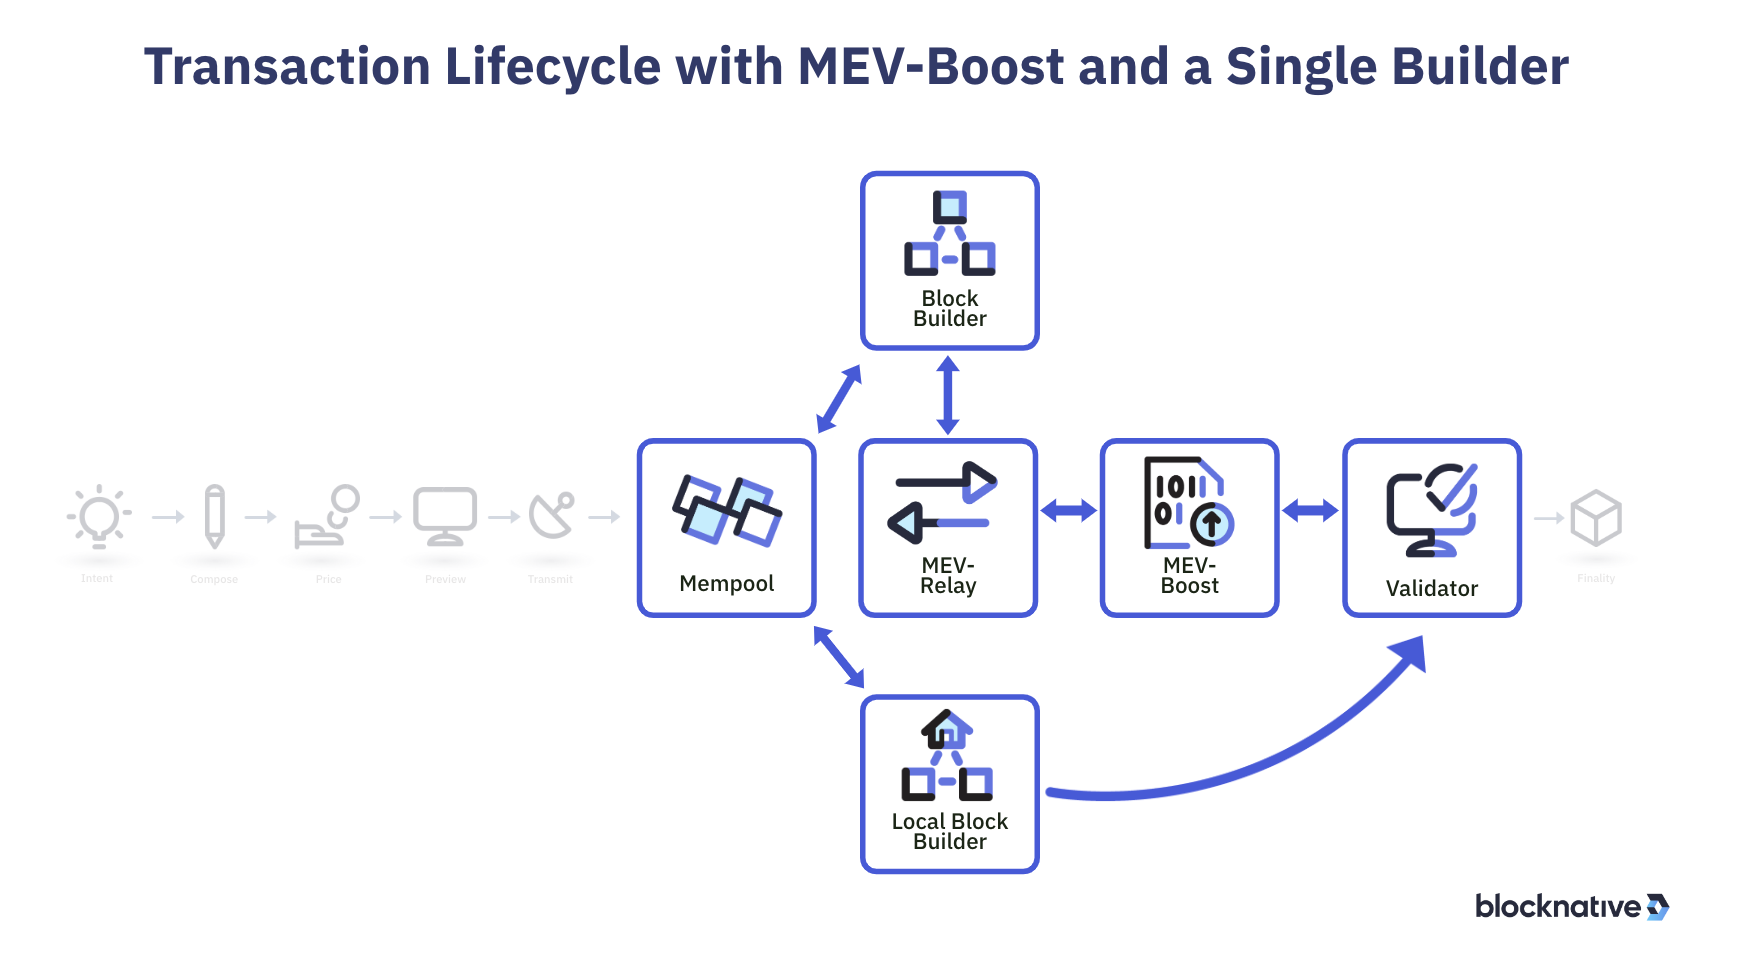 Transaction Lifecycle with MEV-Boost and a Single Builder